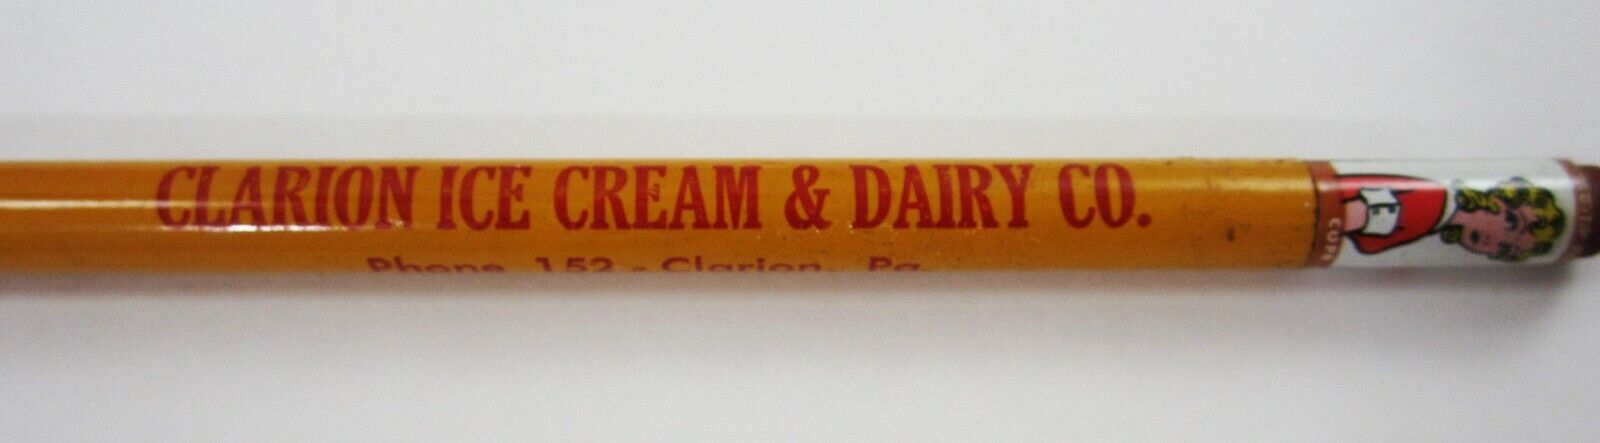 Vintage Clarion Ice Cream Dairy Advertising Pencil Blondie Clarion PA 1940s